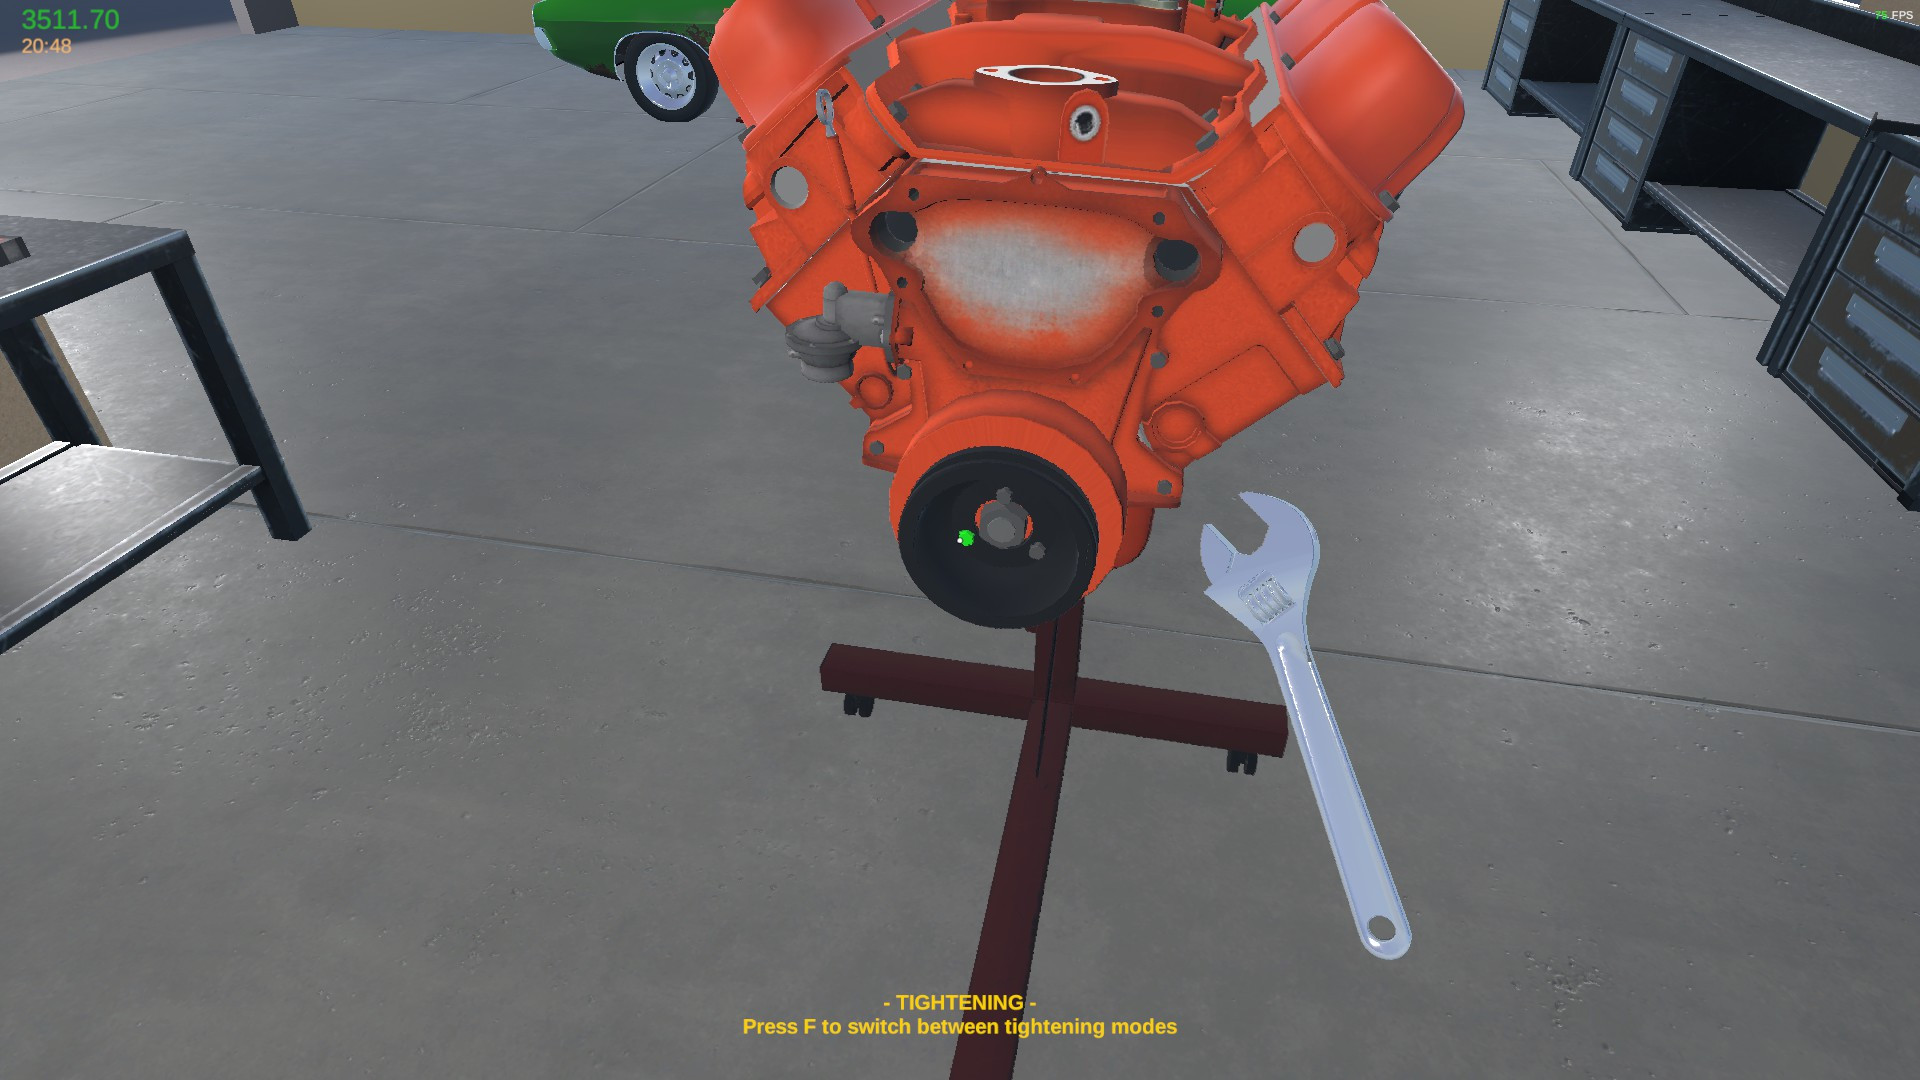 My Garage How to build a V8 engine guide - 4. Accessories - 0F8FFA3